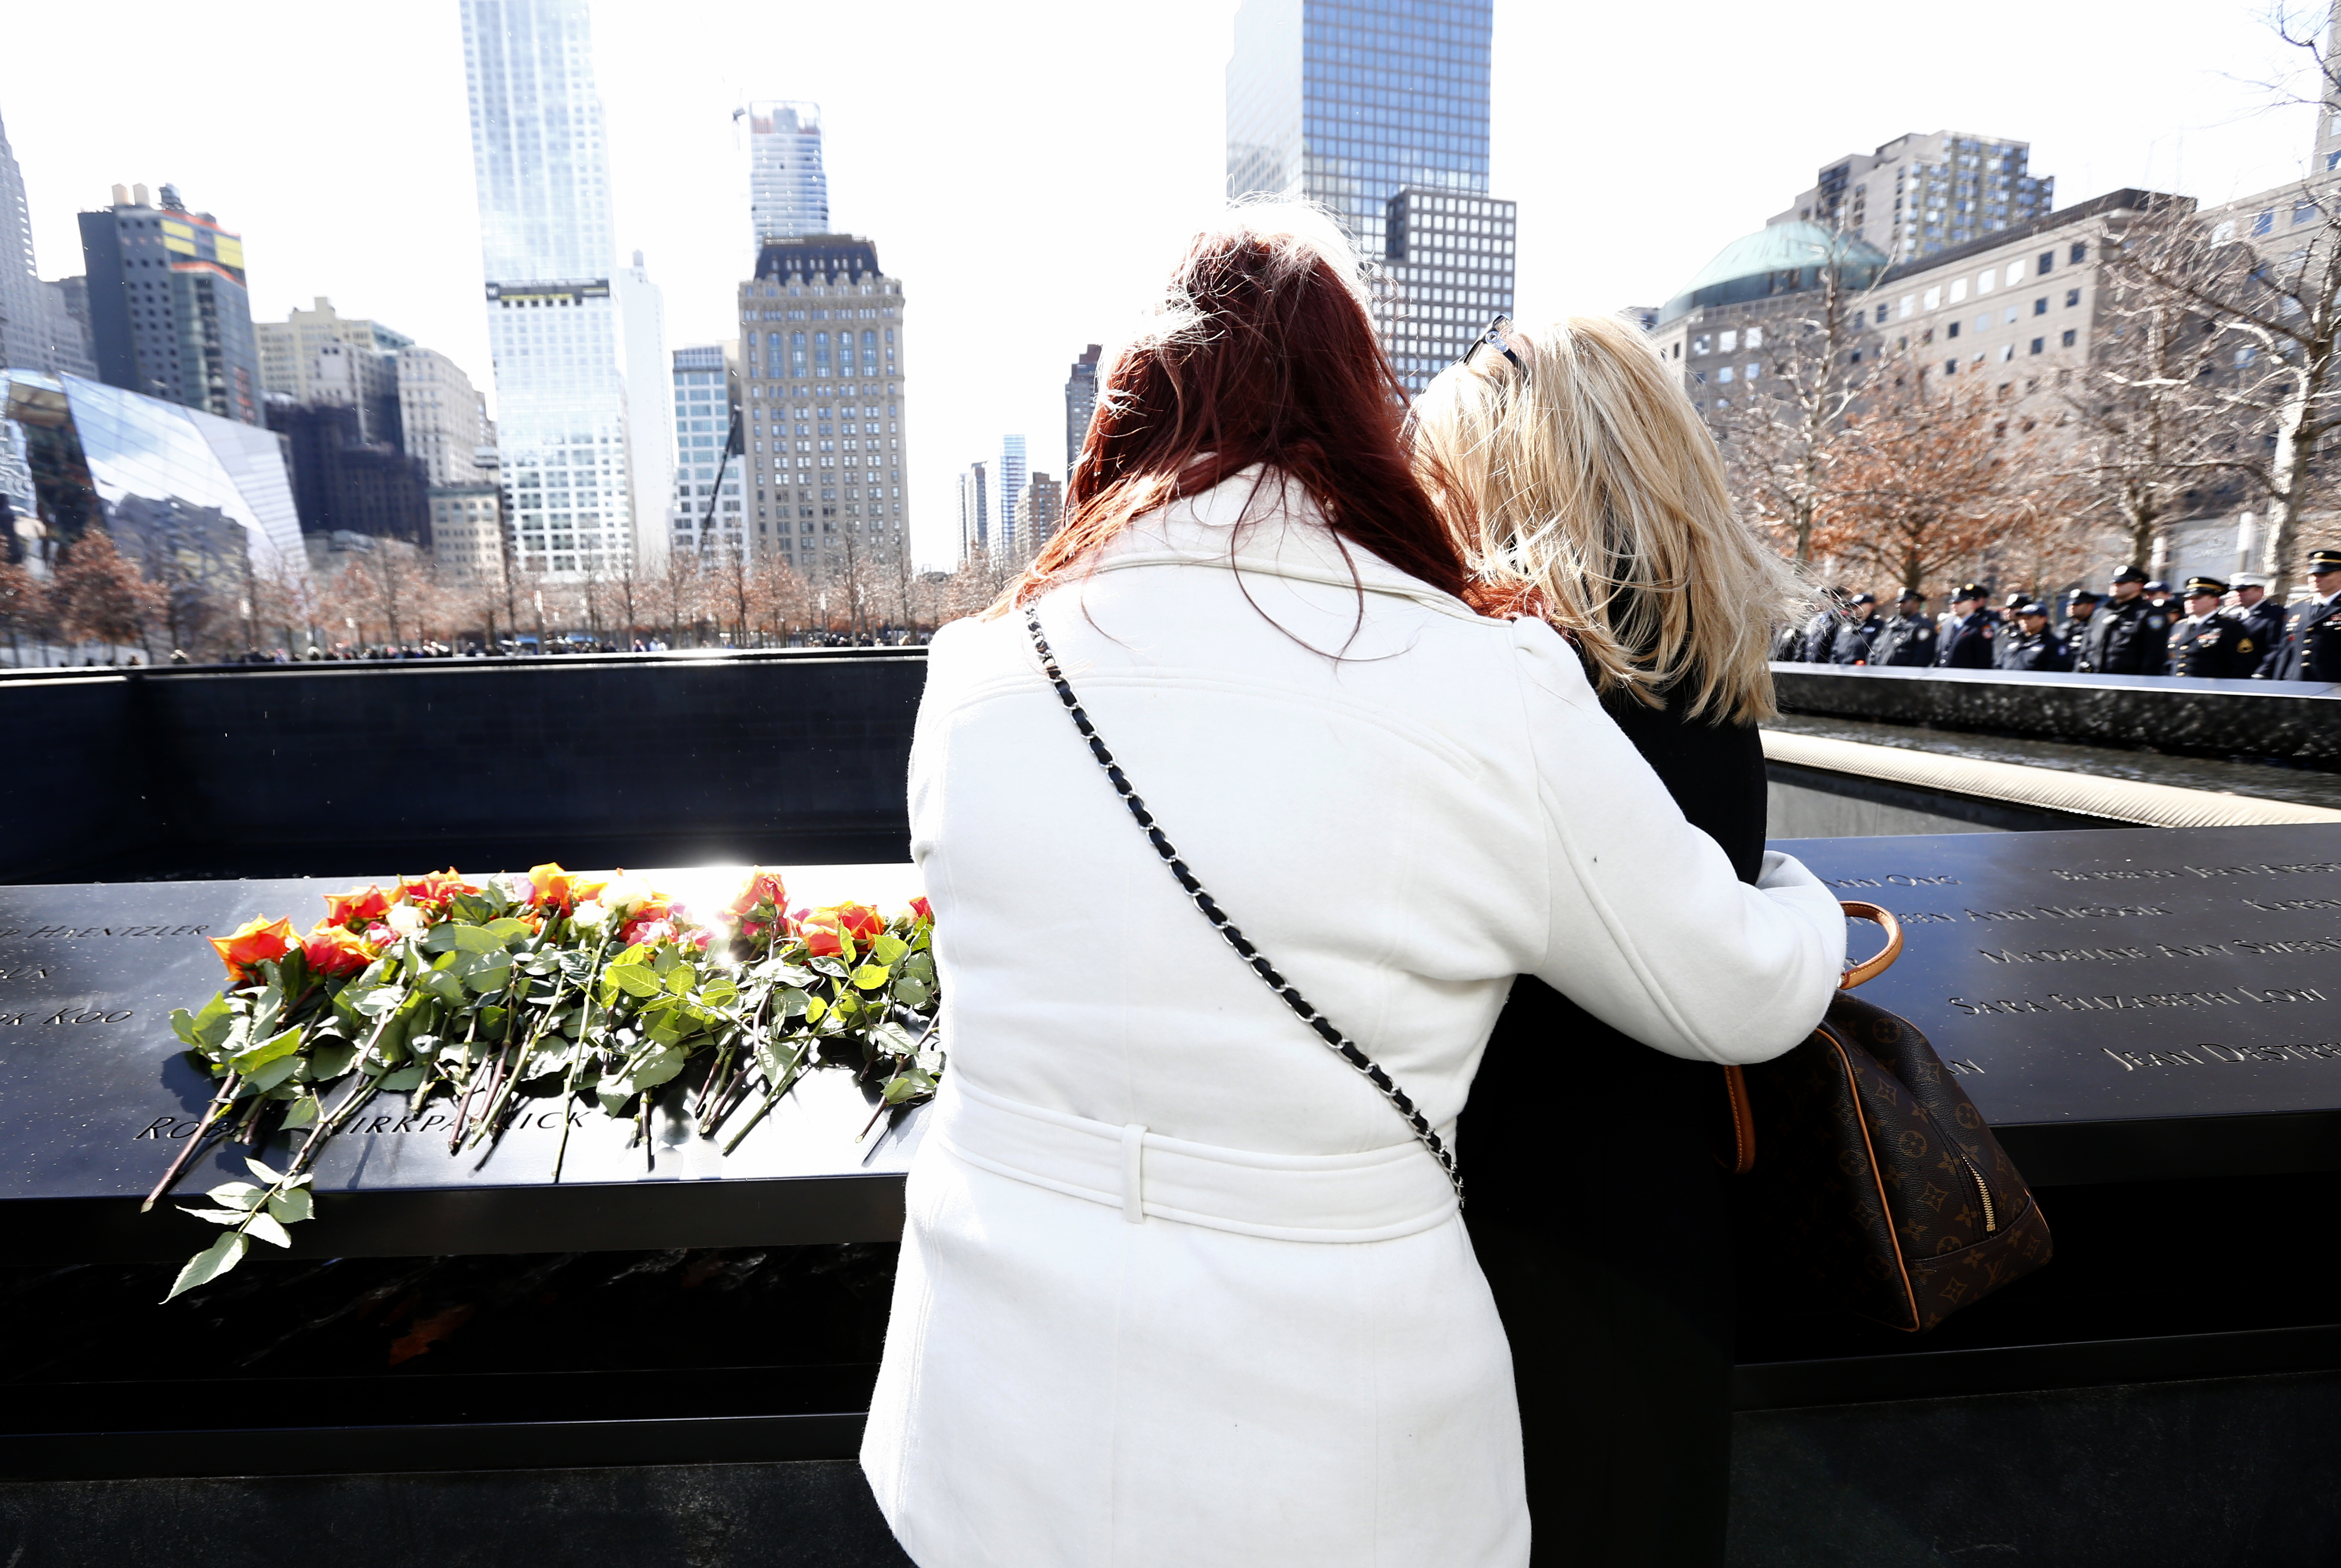 Two women, one in a white jacket and the other in a black jacket, embrace as they view a name at the Memorial. Flowers have been placed on the bronze parapet where the names are inscribed. 